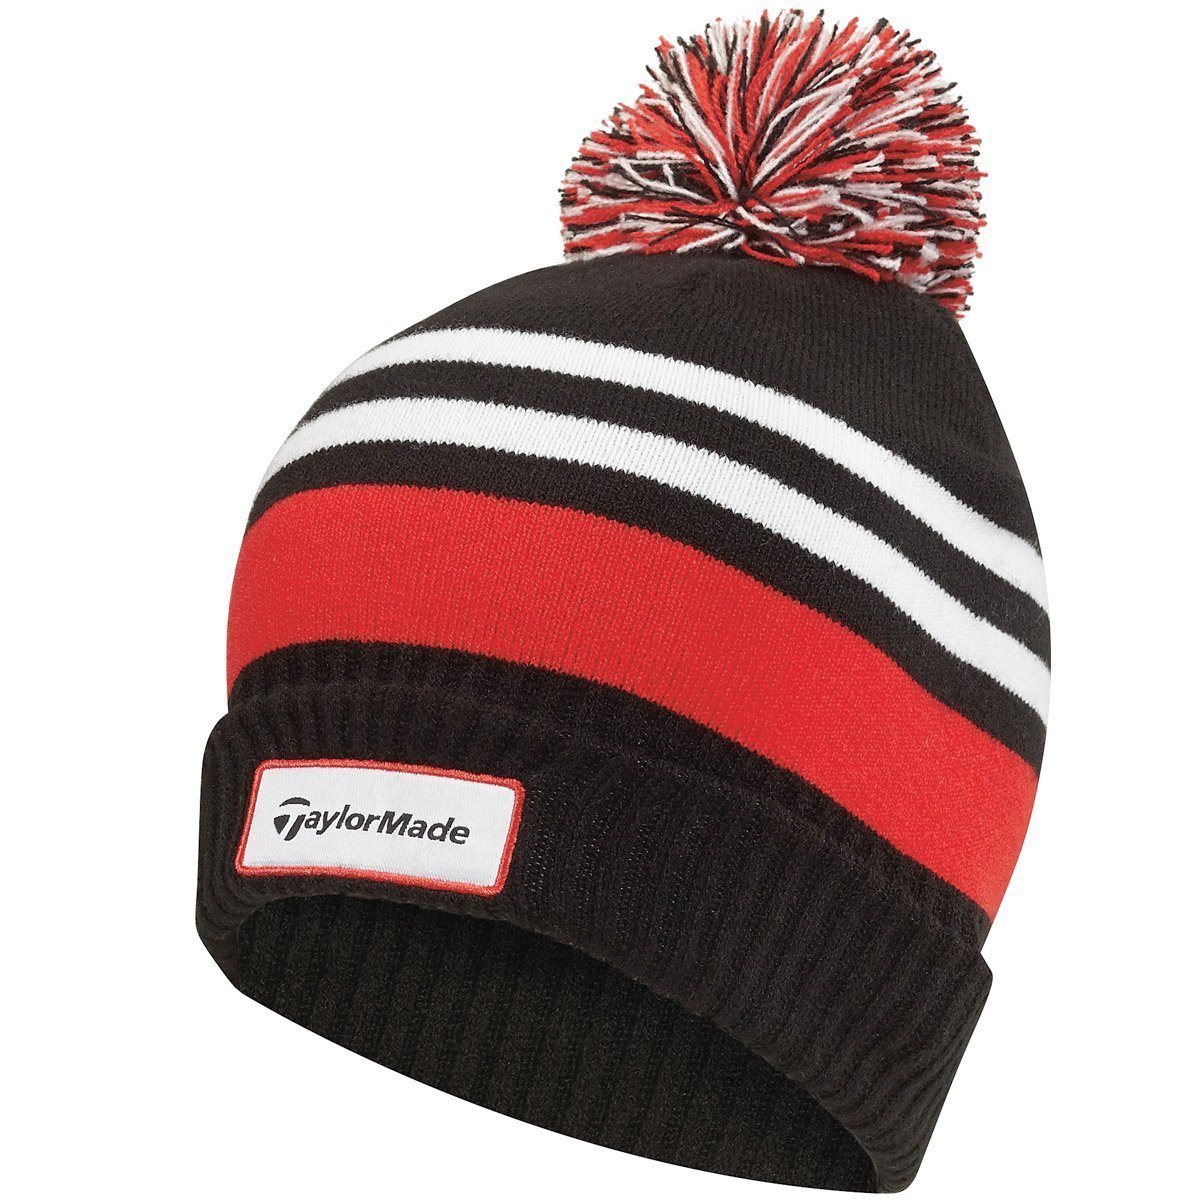 Taylormade Mens Double Knit Thermal Striped Golf Beanie Bobble Hats